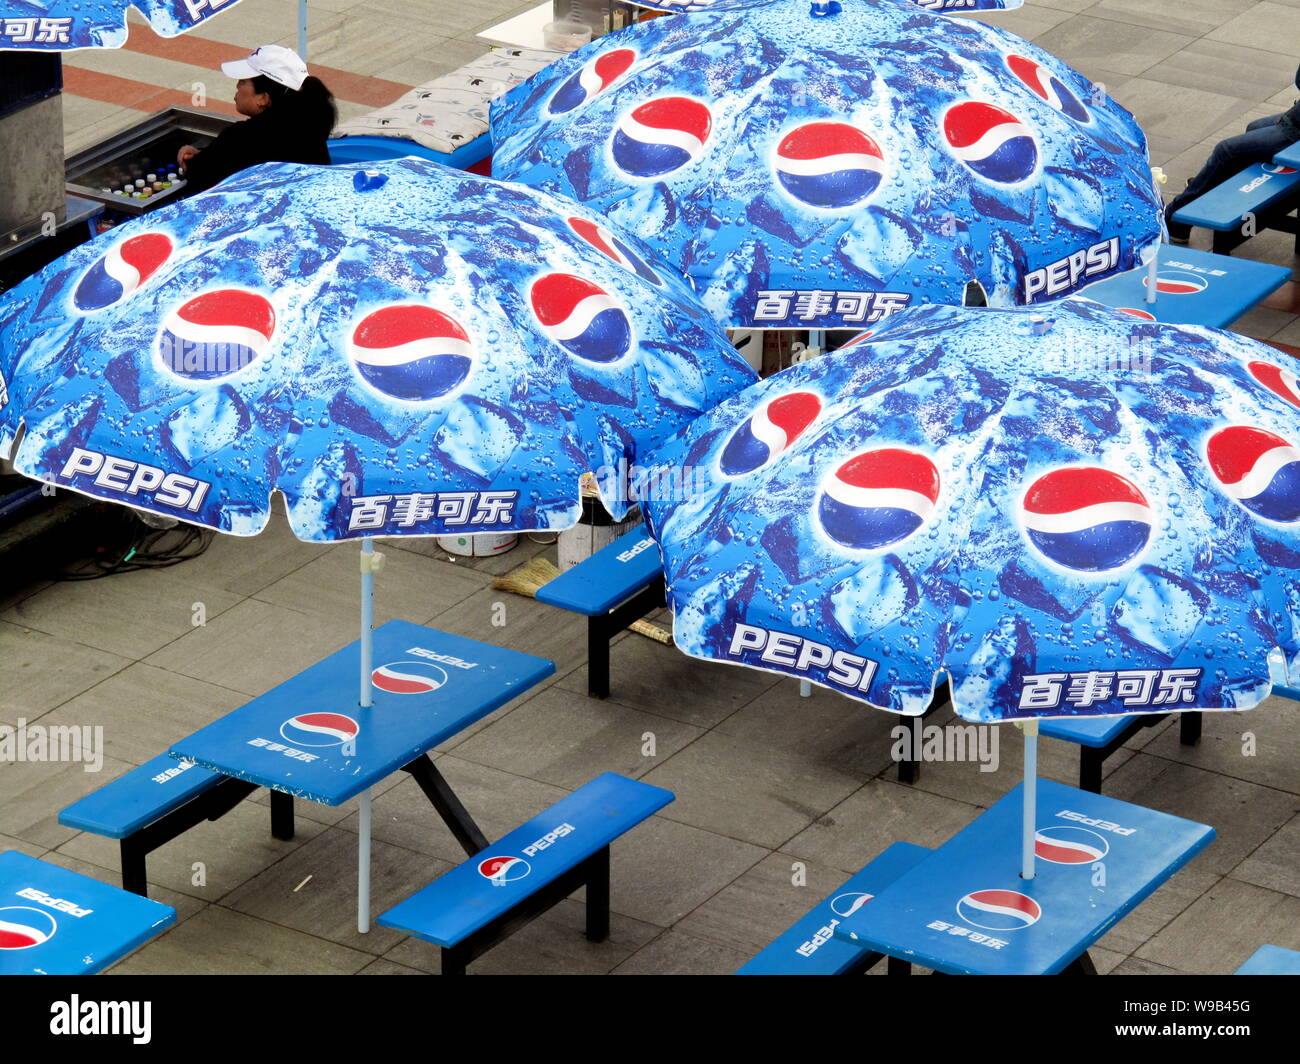 View of Pepsi beach umbrellas on a shopping street in Jilin city, northeast  Chinas Jilin province, 18 May 2010. PepsiCo, the worlds No.2 soft drink  Stock Photo - Alamy